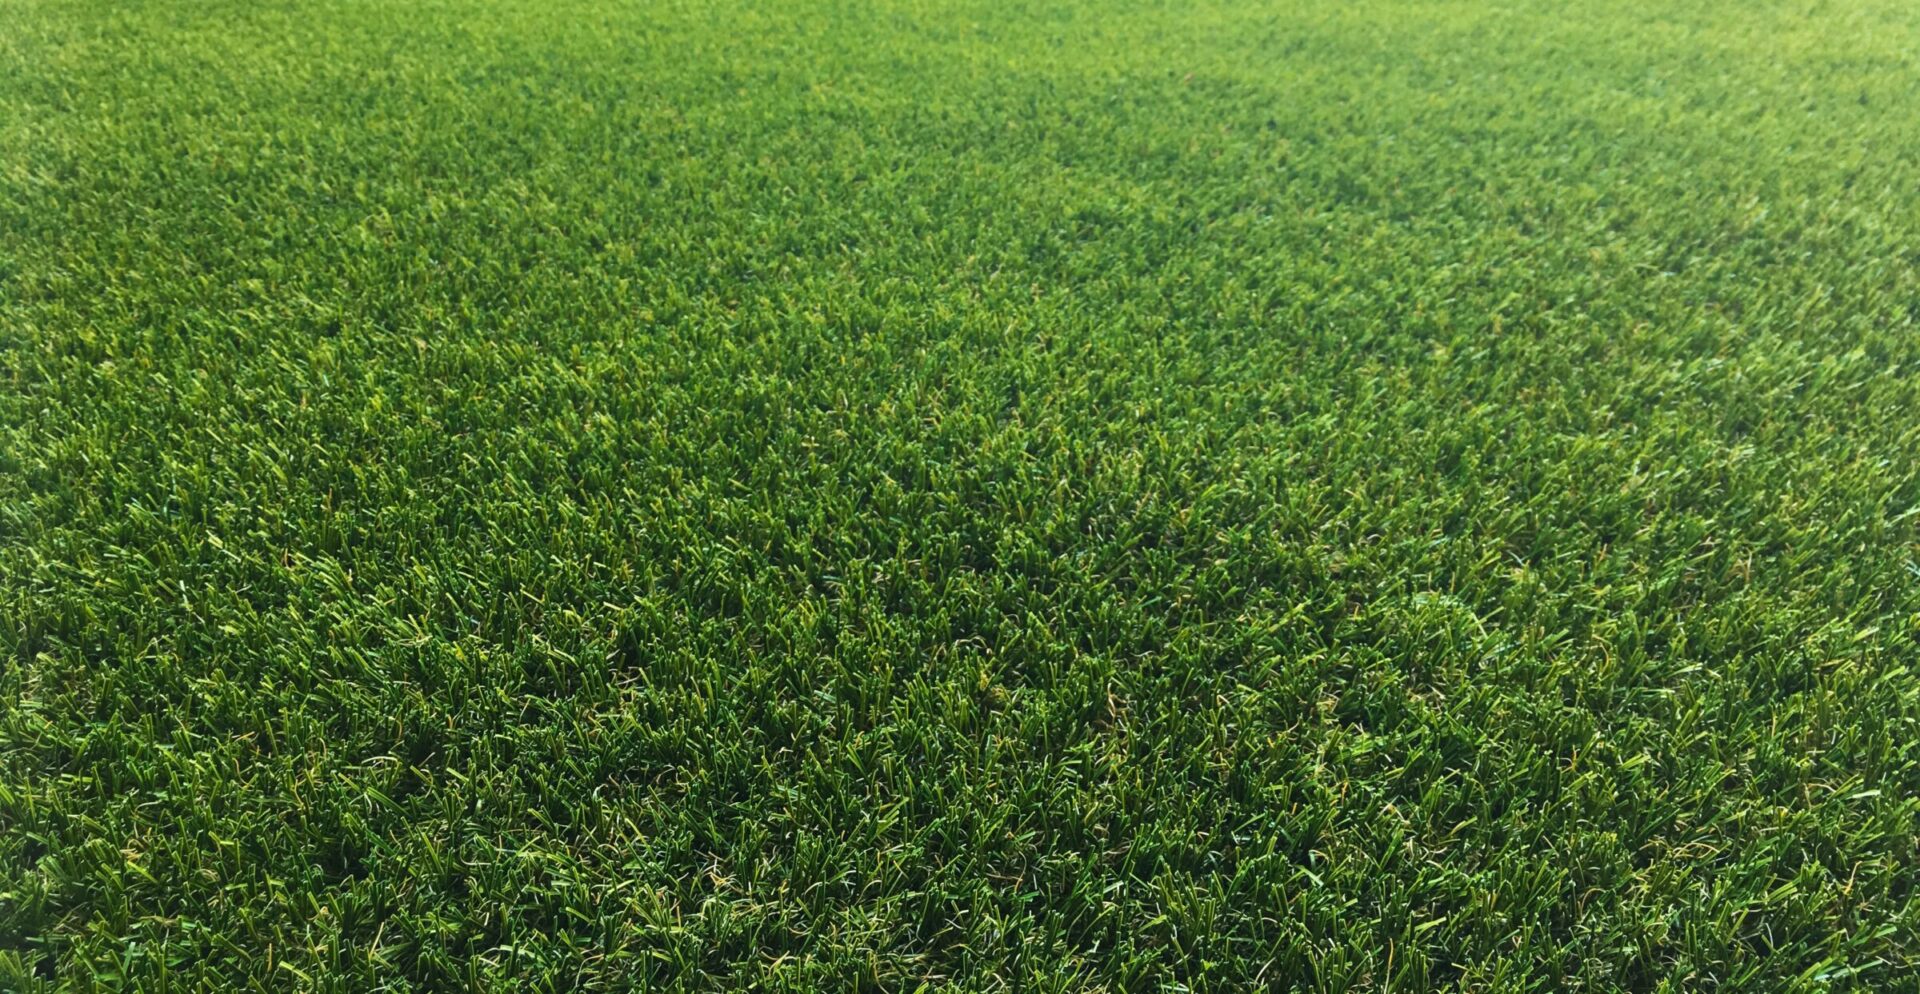 This image shows a close-up view of a vibrant green, freshly mowed lawn, stretching out evenly across the frame with no visible imperfections.